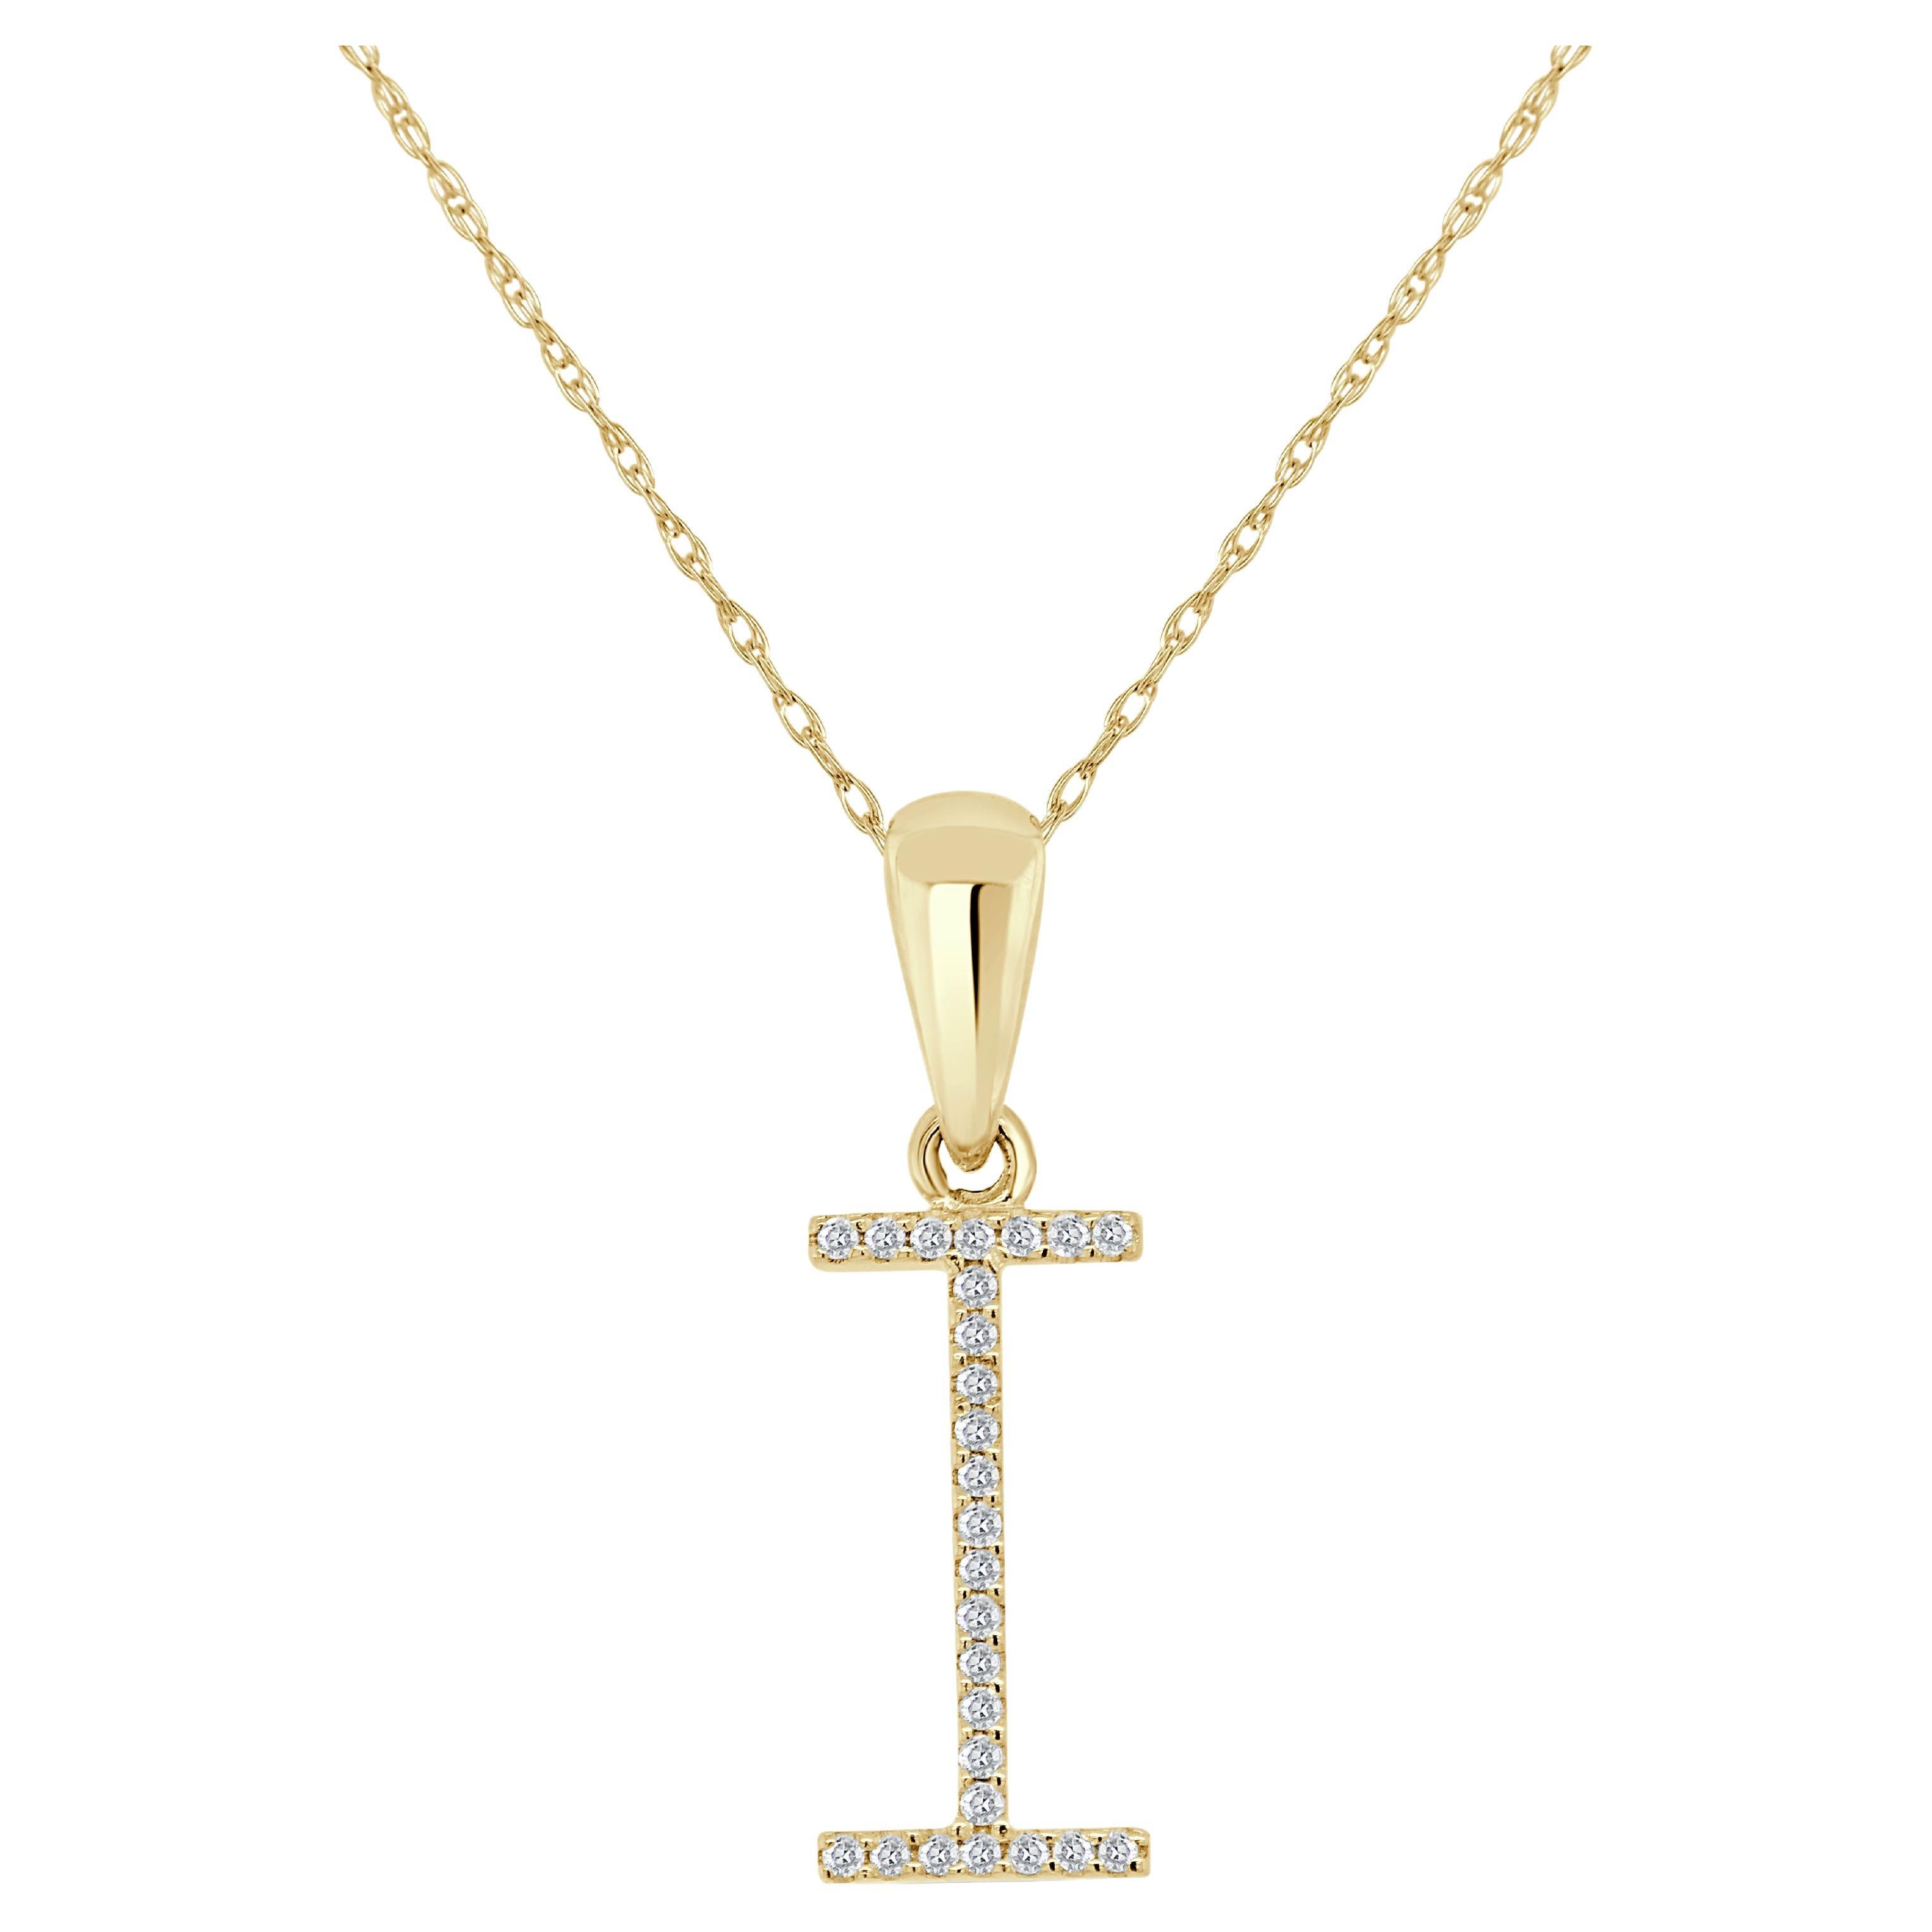 14K Yellow Gold 0.10ct Diamond Initial i Pendant for Her